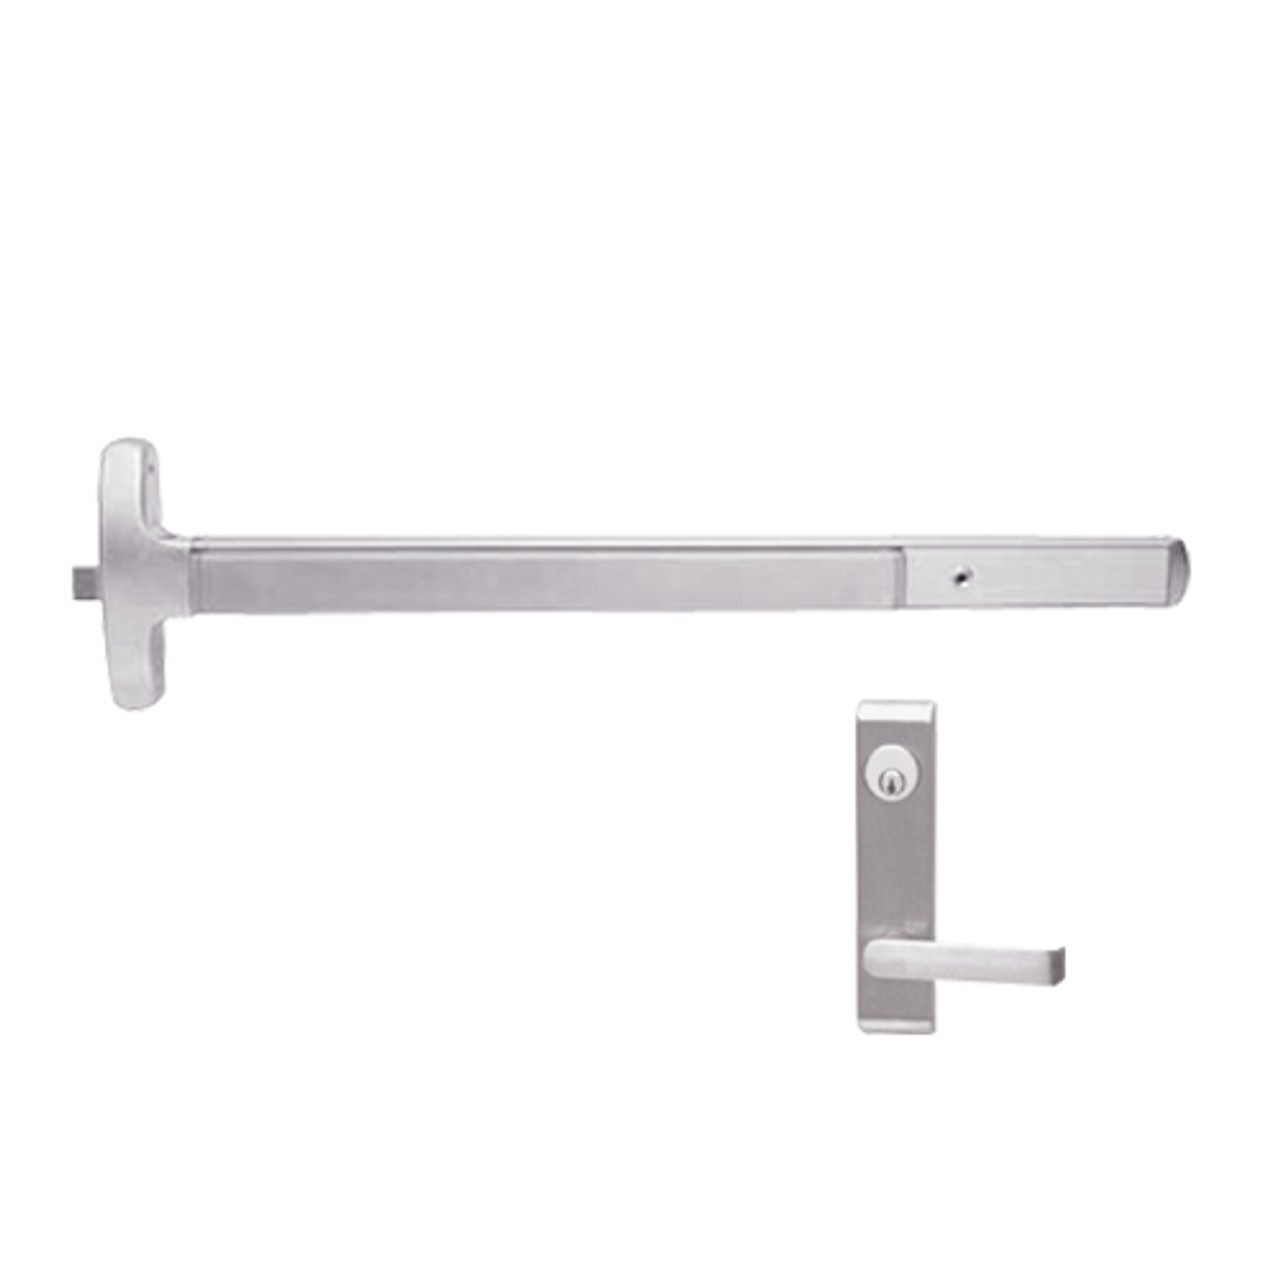 24-R-L-DANE-US32-4-RHR Falcon Exit Device in Polished Stainless Steel